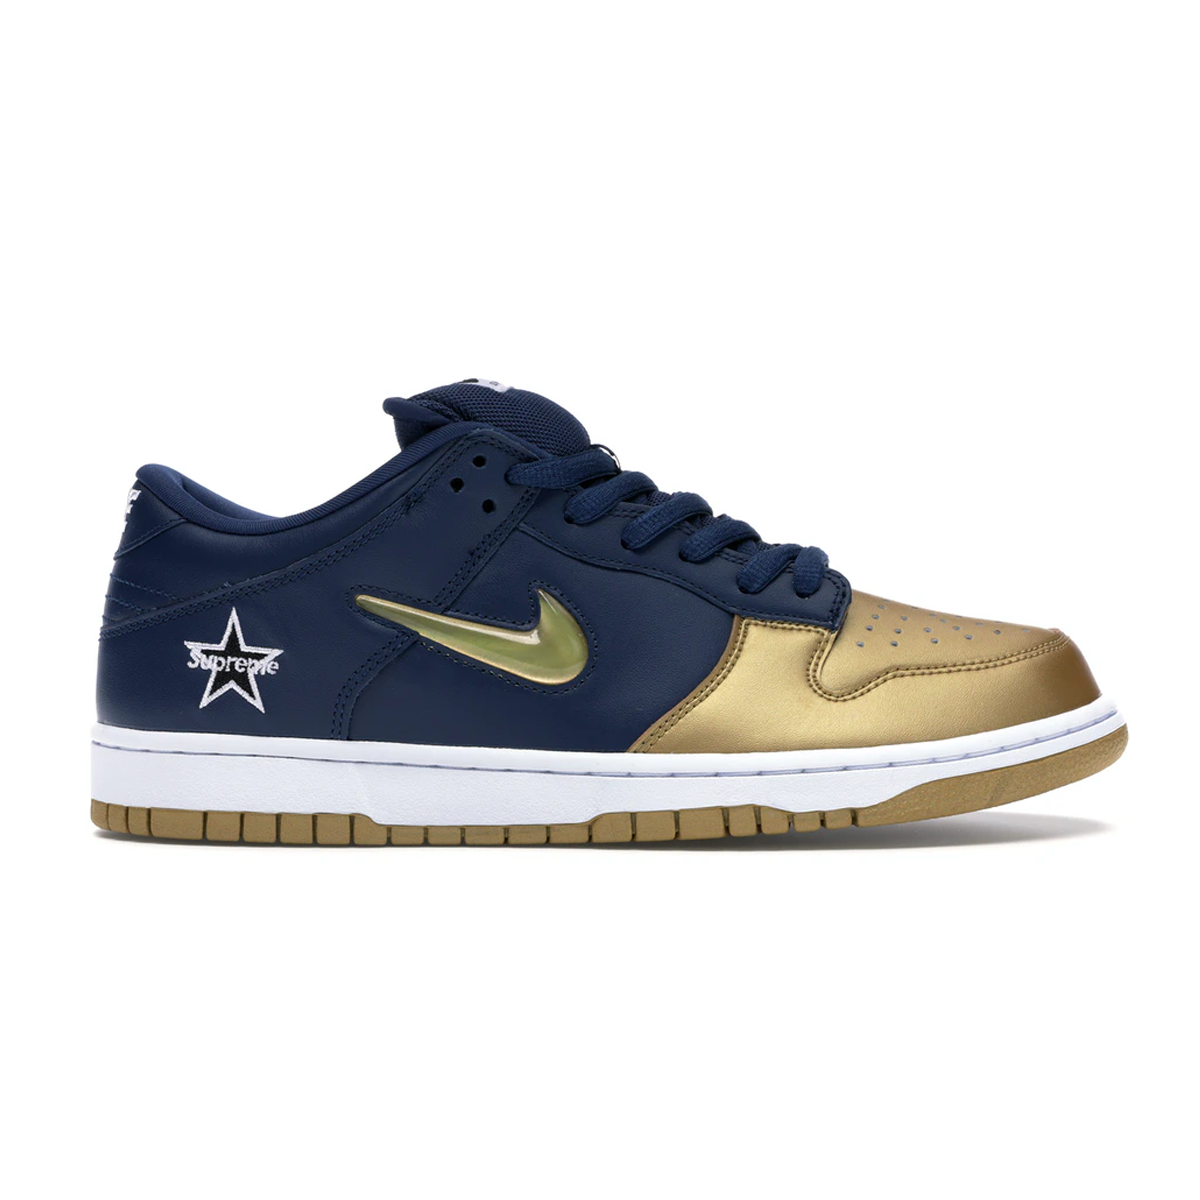 nike dunks dipped in gold